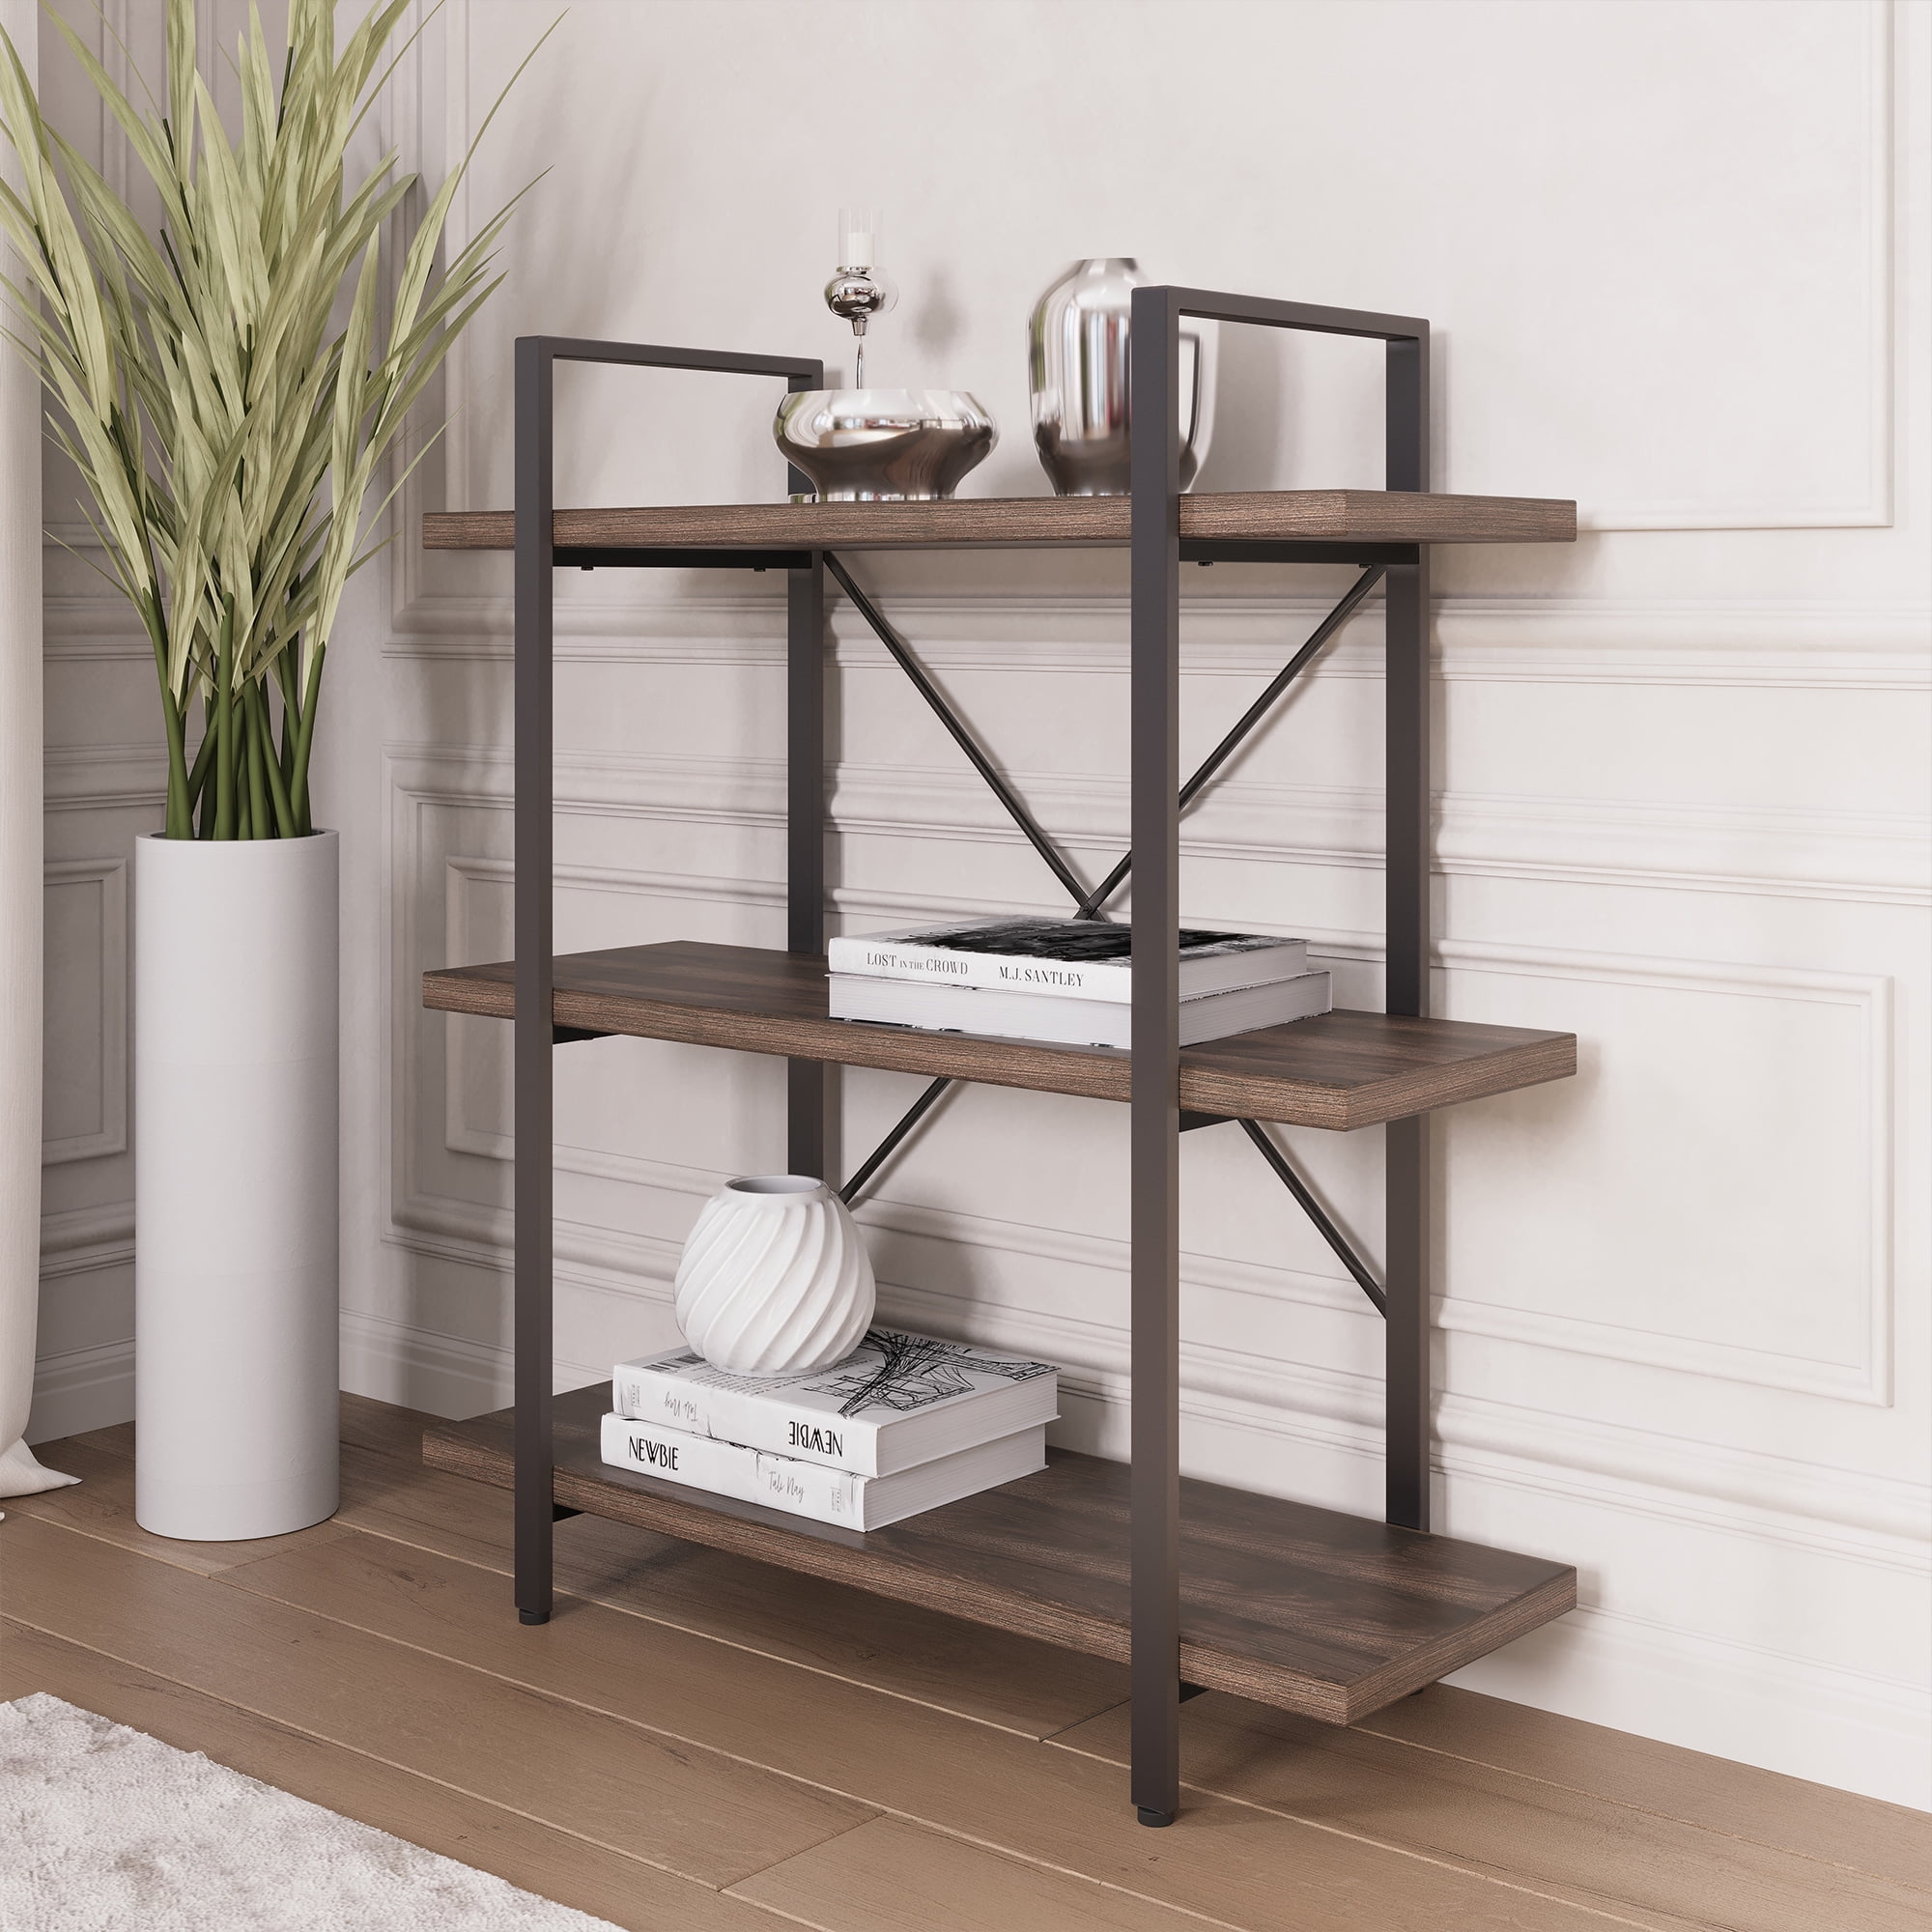 Retro Details about   5-Shelf Industrial Style Bookcases & Book Shelves LITTLE TREE Solid Wood 